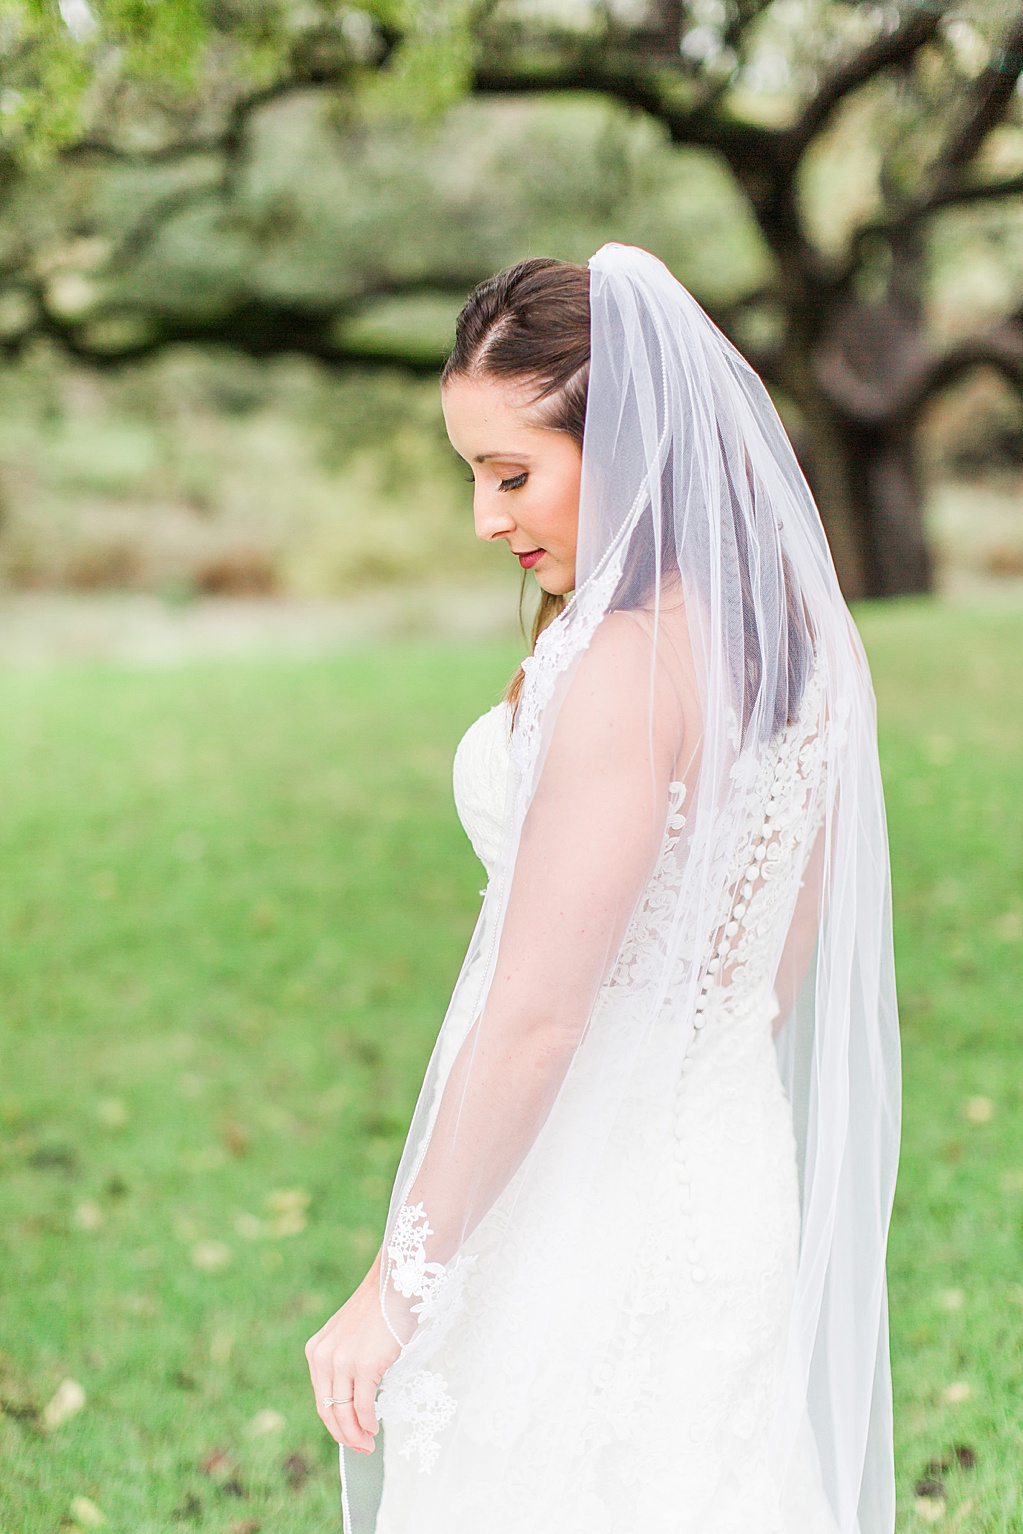 Rainy day bridal session at sisterdale dancehall in boerne texas 0008